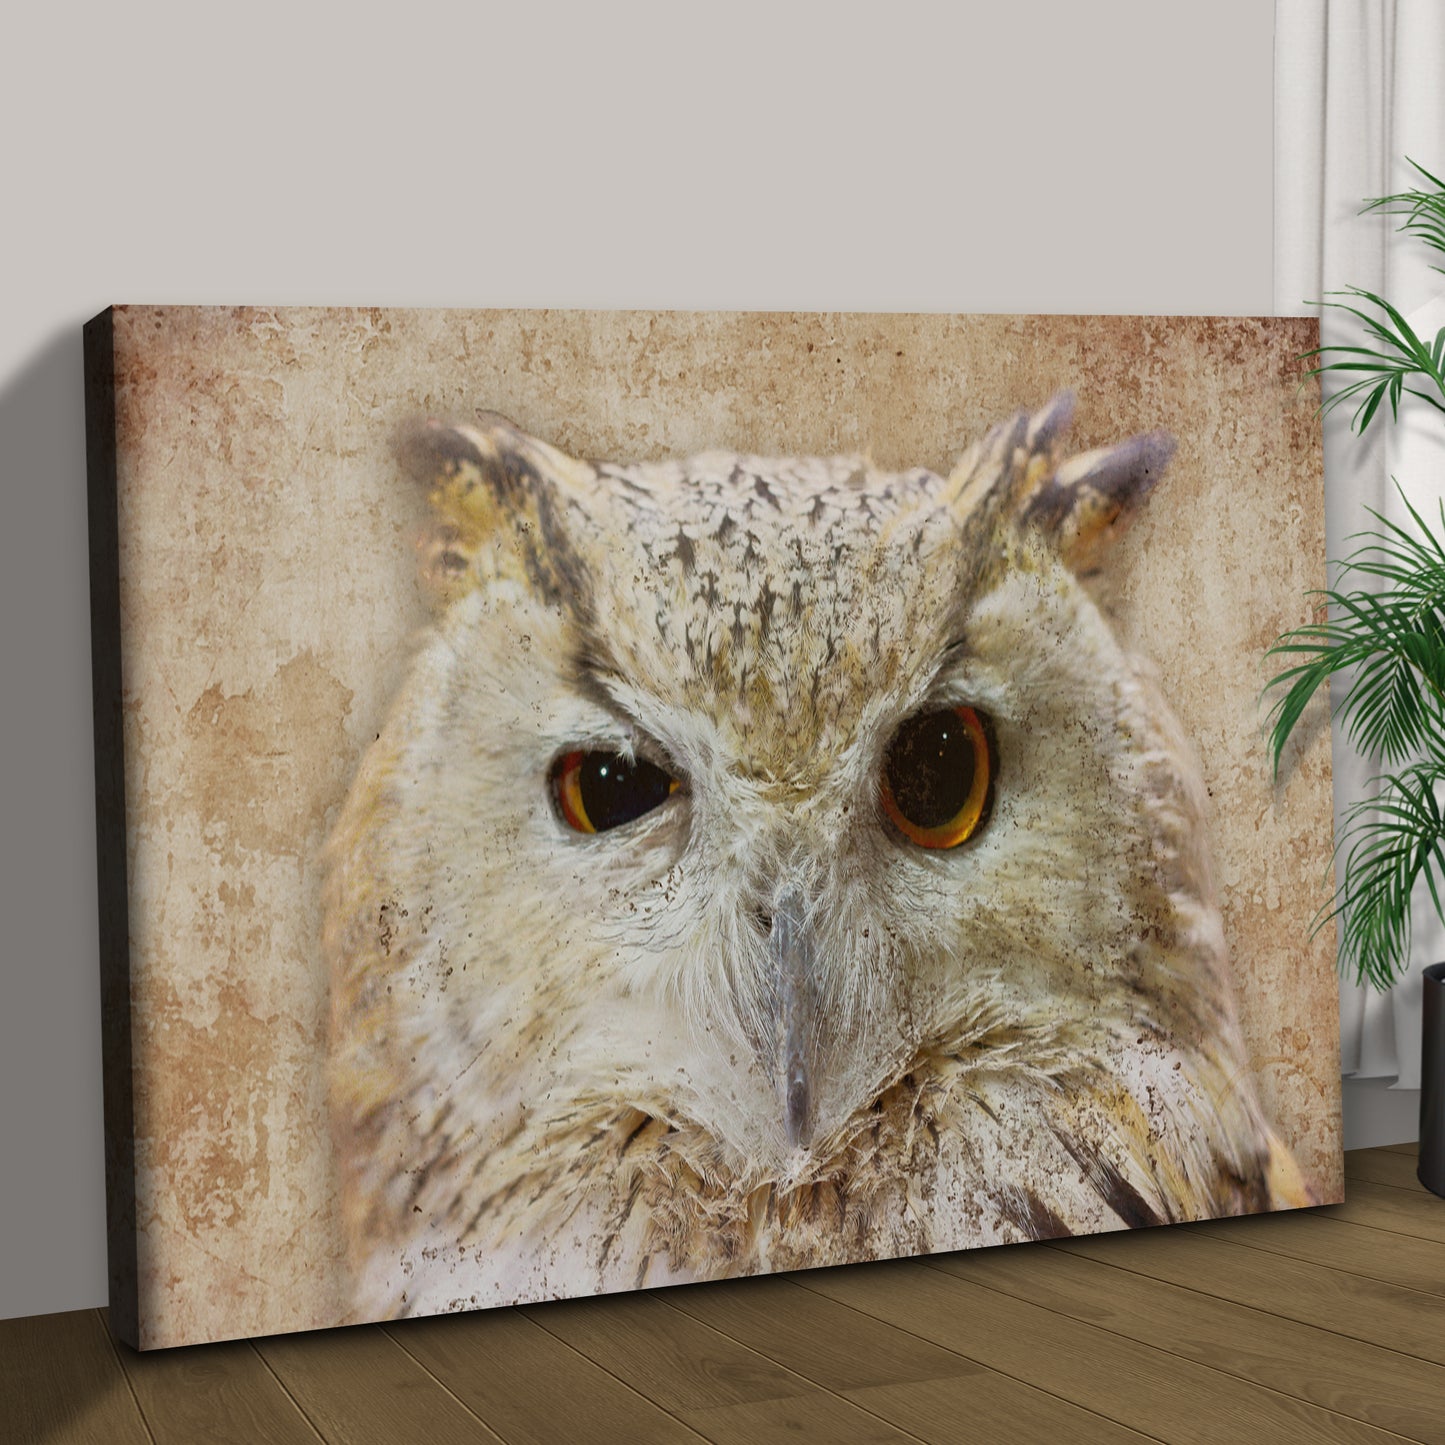 Your Owl Next Door Canvas Wall Art Style 2 - Image by Tailored Canvases